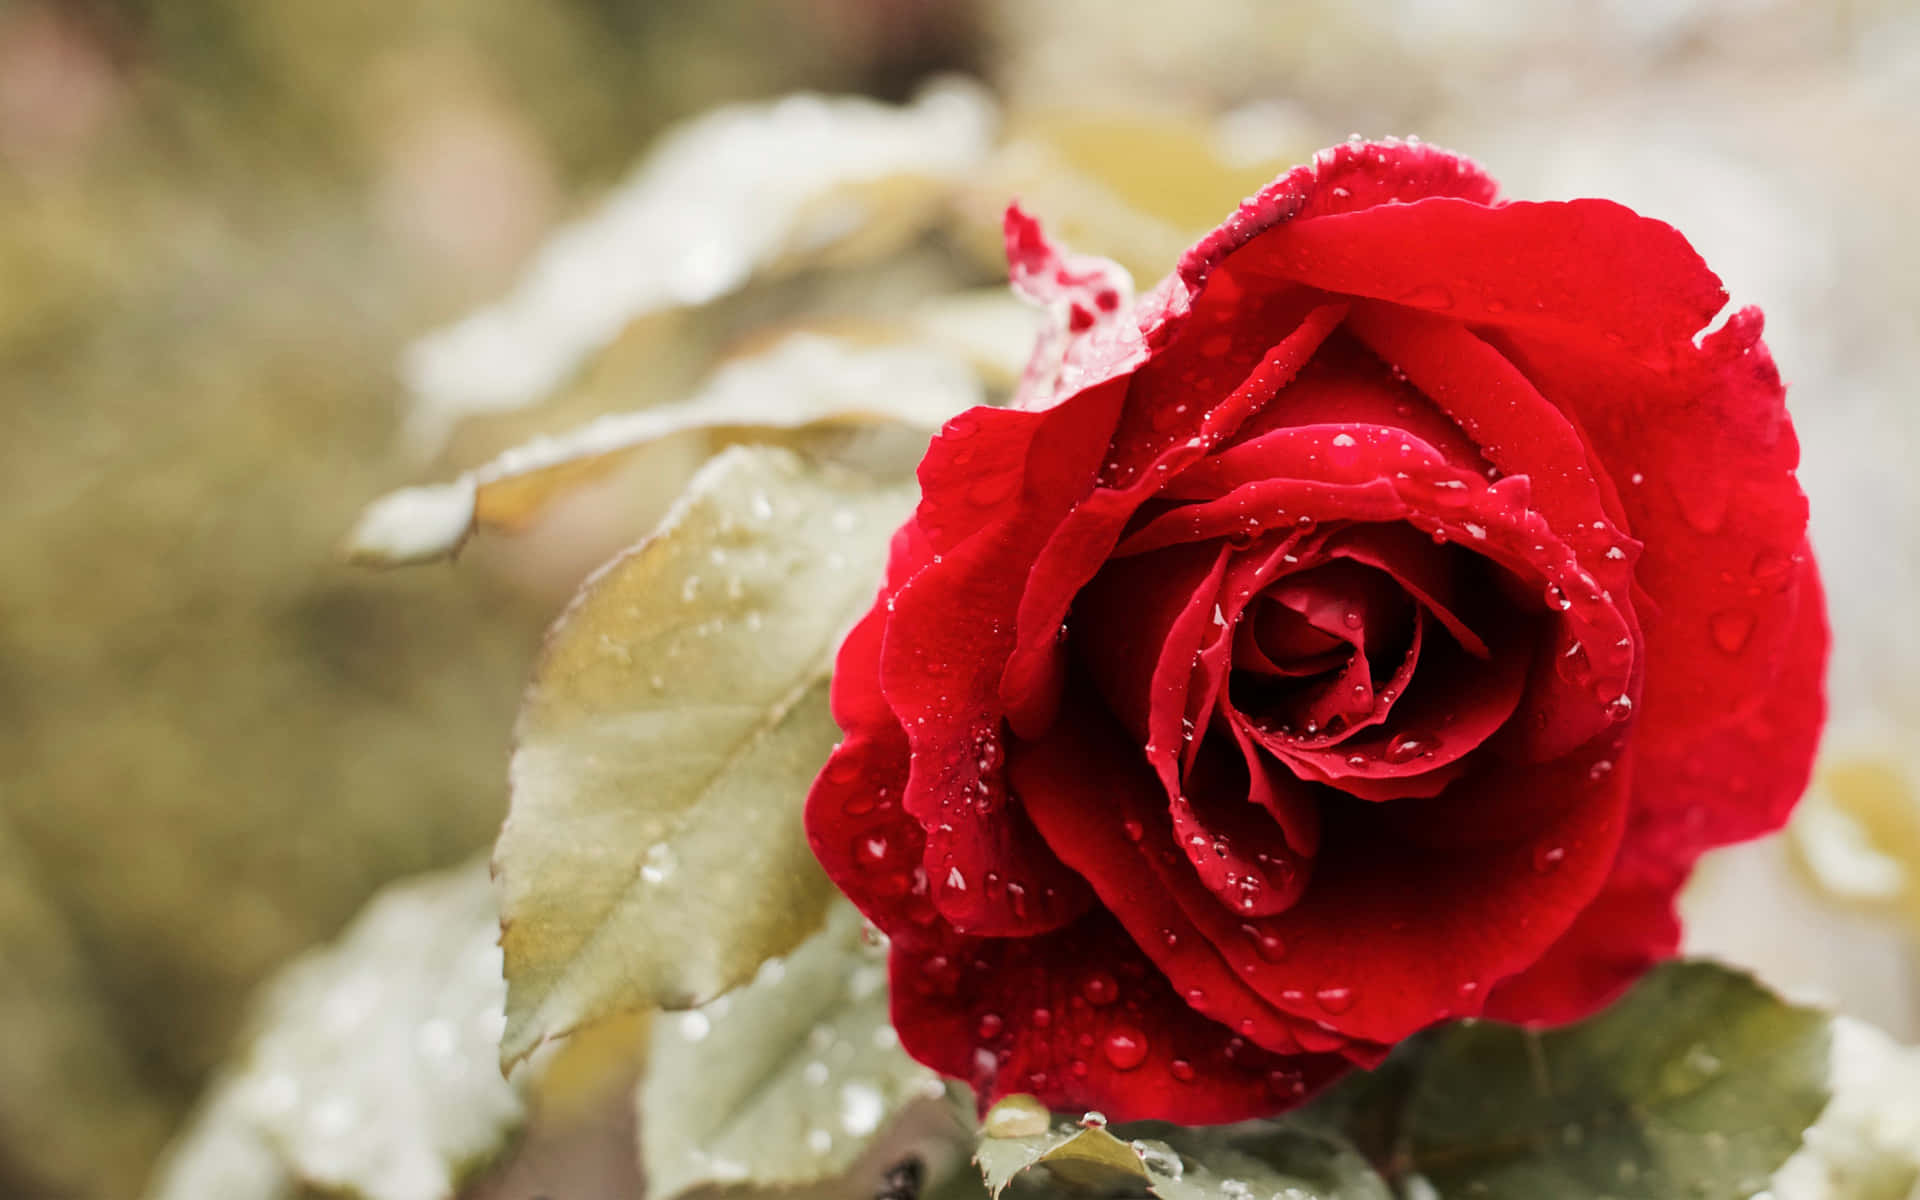 A Red Rose With Water Droplets On It Wallpaper